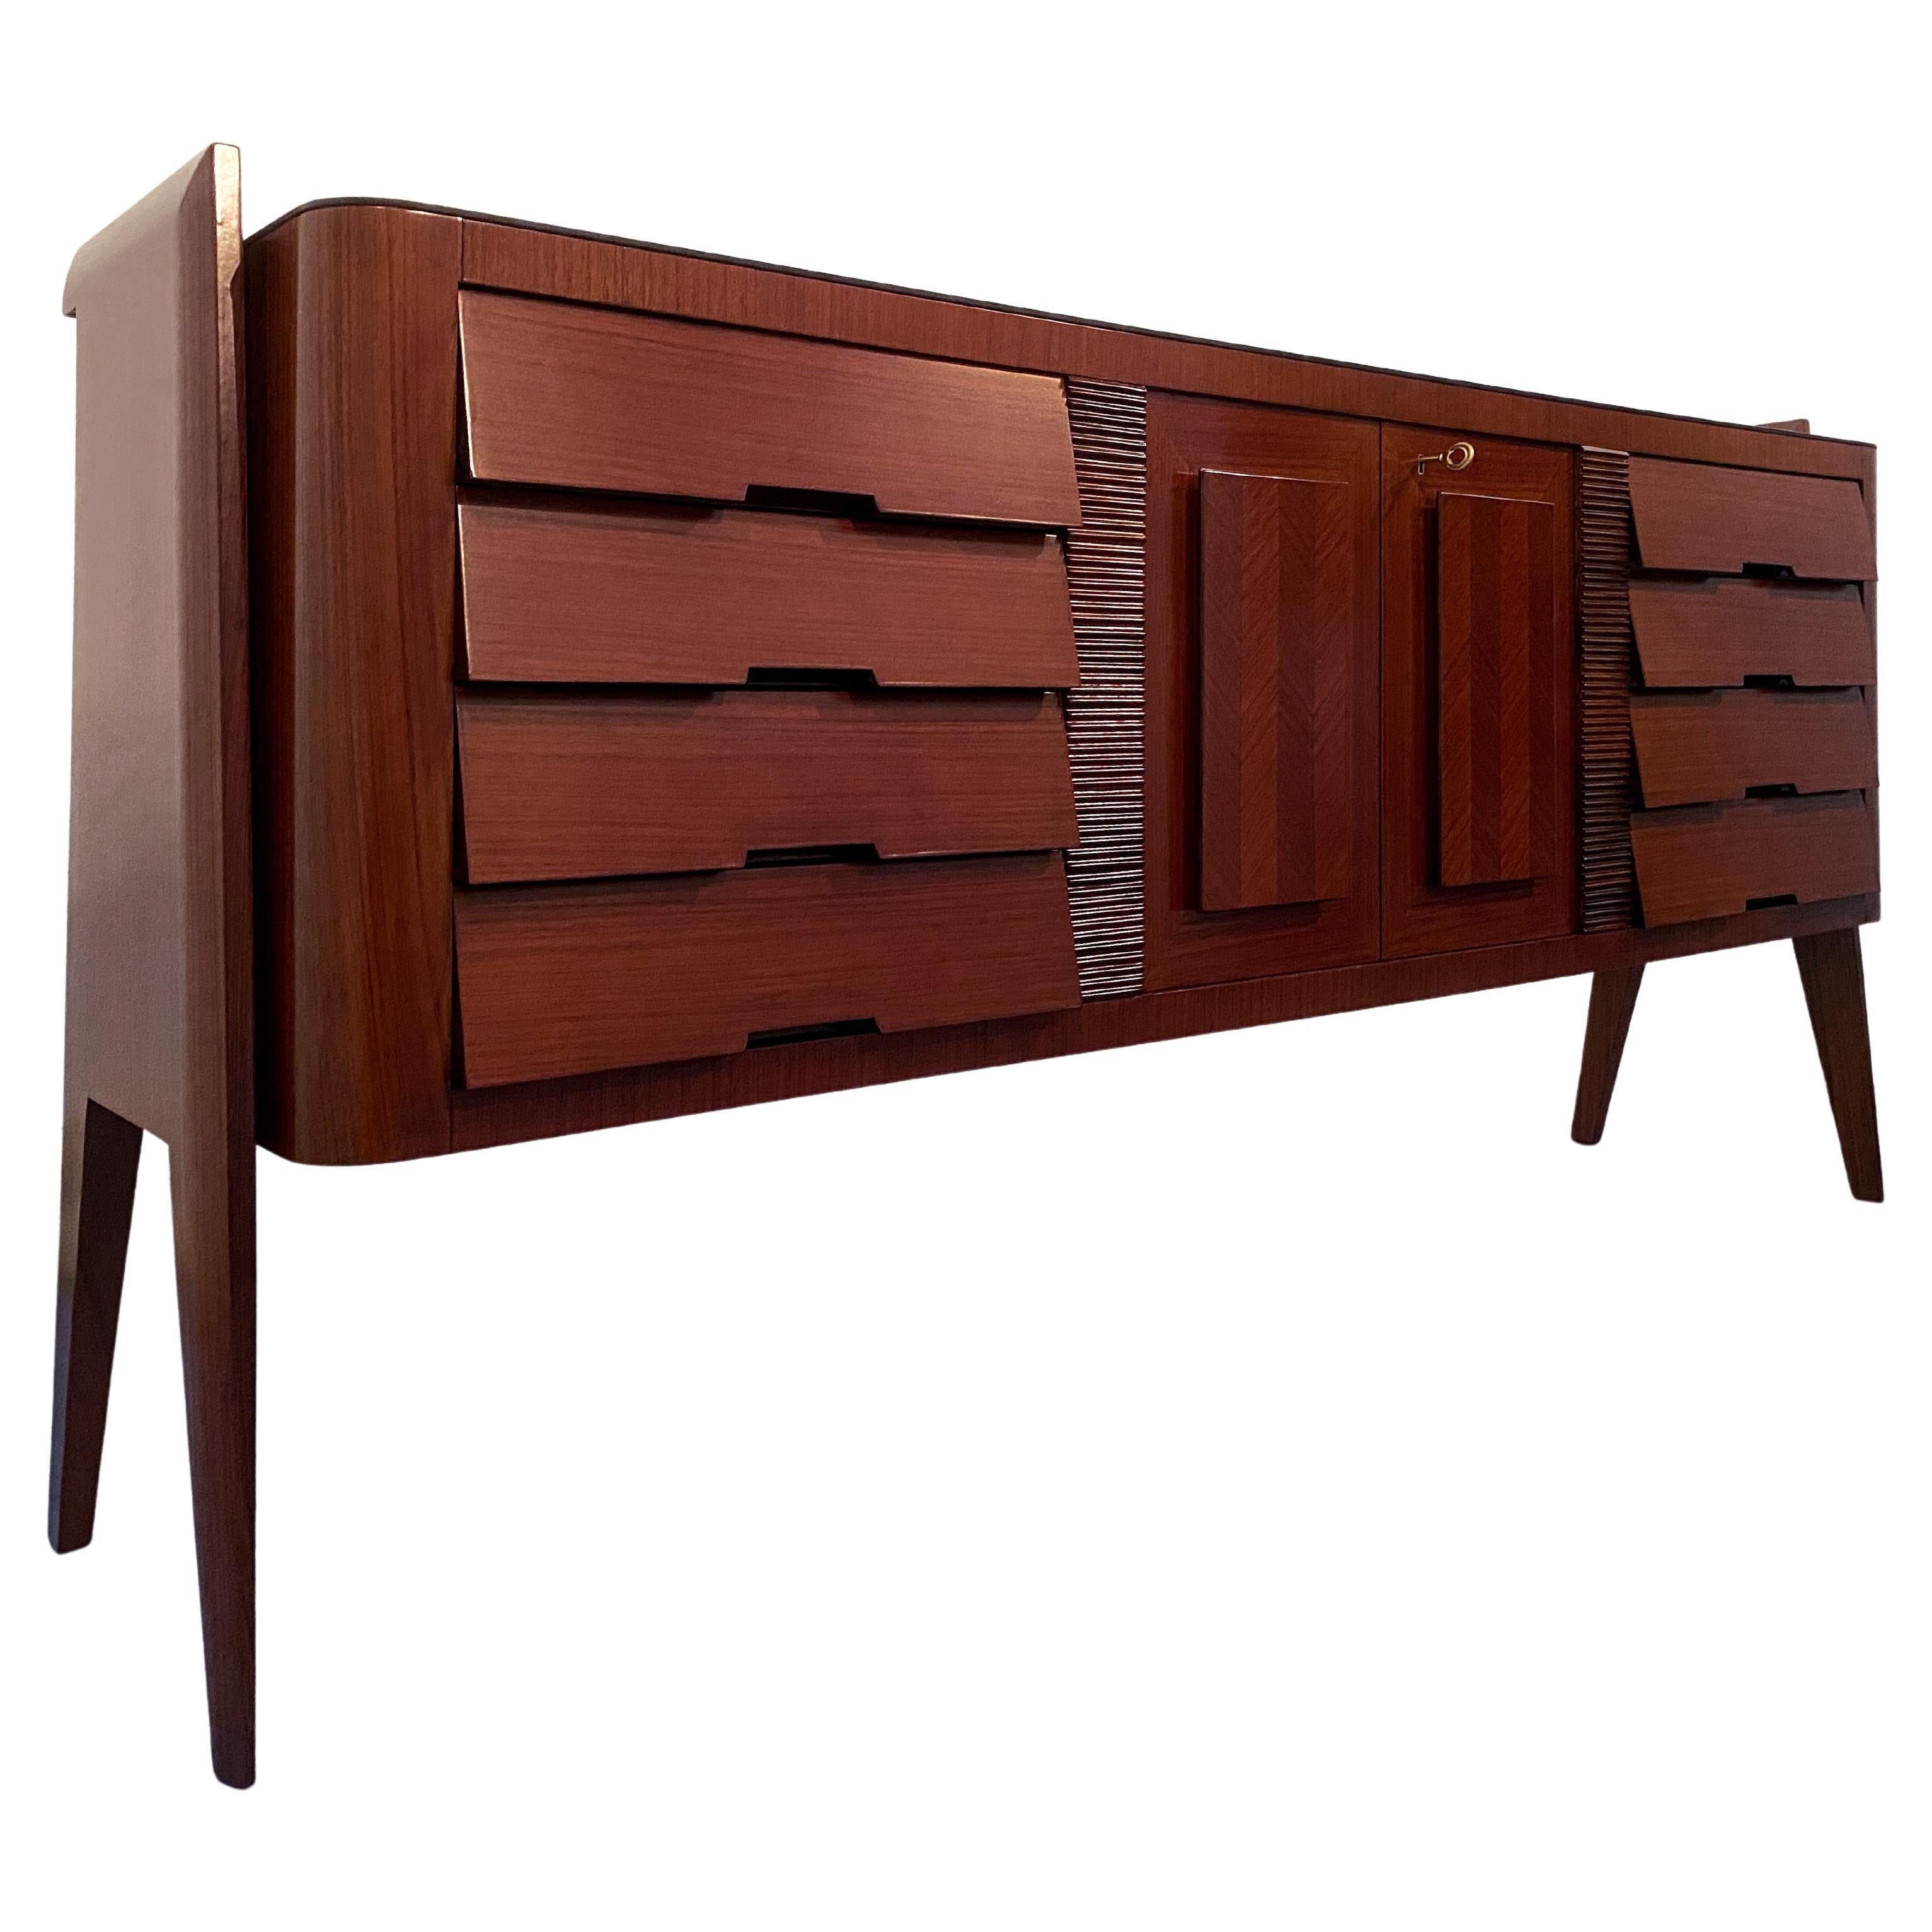 Italian Midcentury Sideboard Bar by Vittorio Dassi, 1950s For Sale